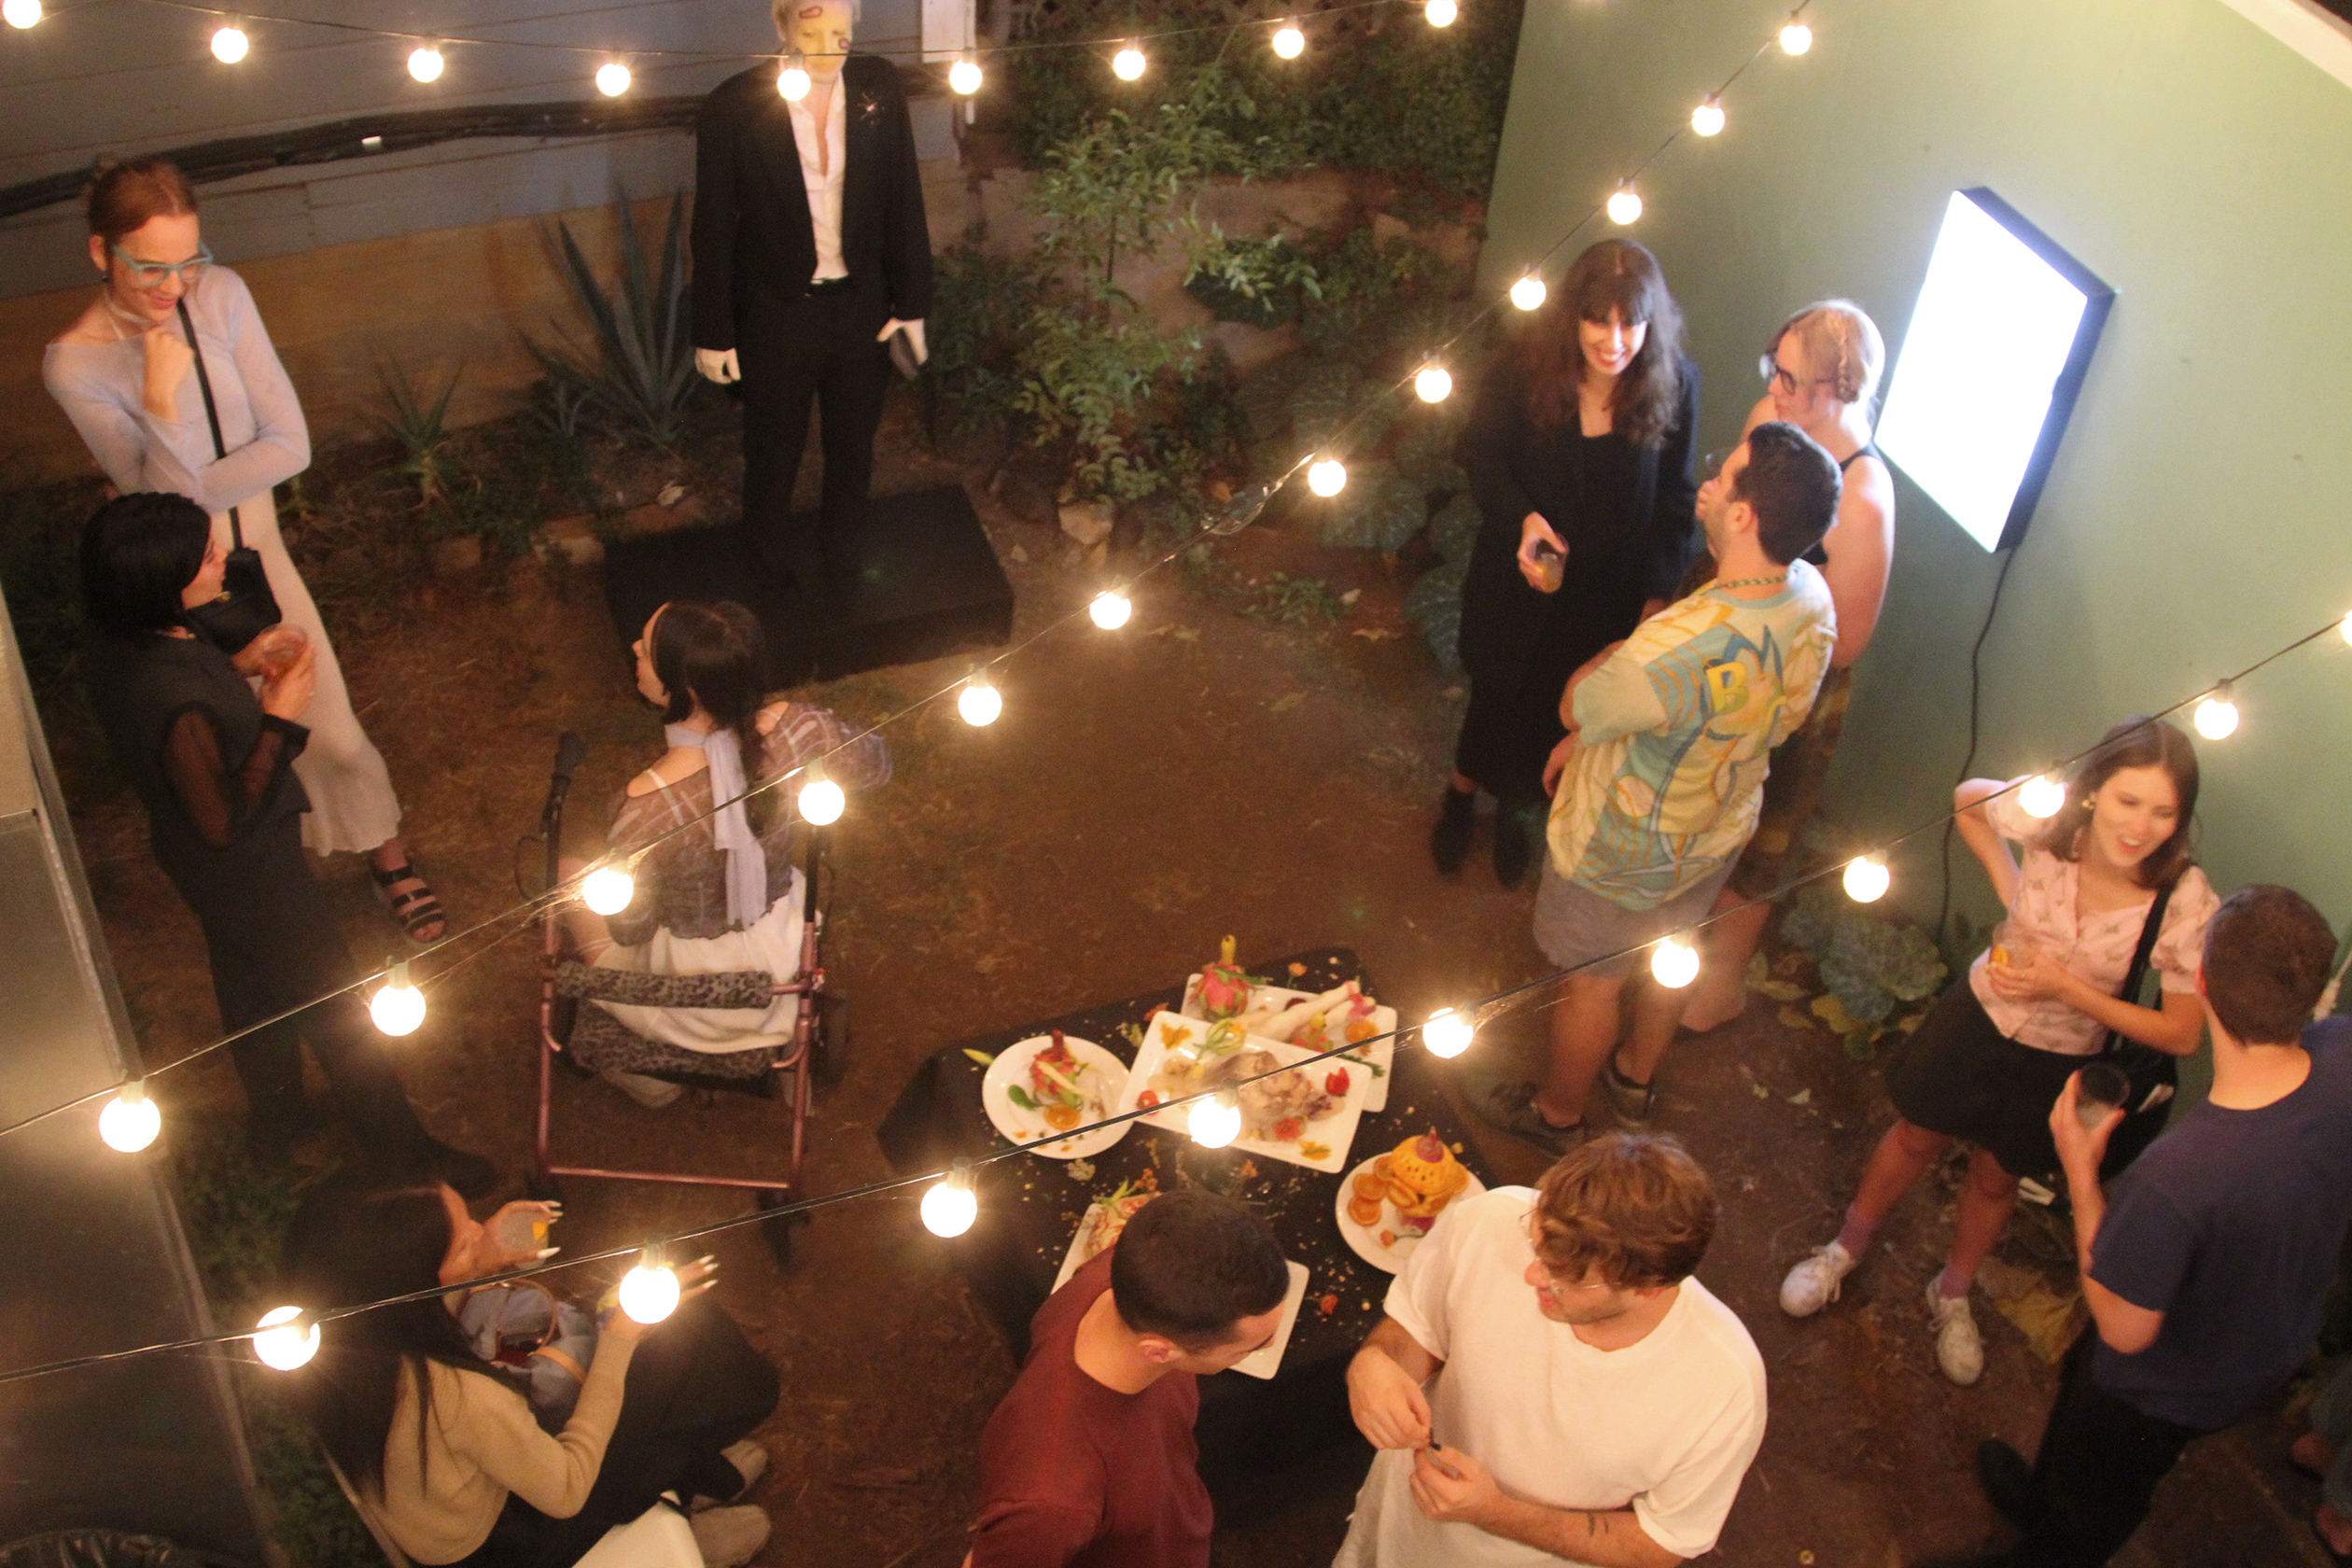 Birds eye shot of people in a backyard at night socializing with string lights in the foreground